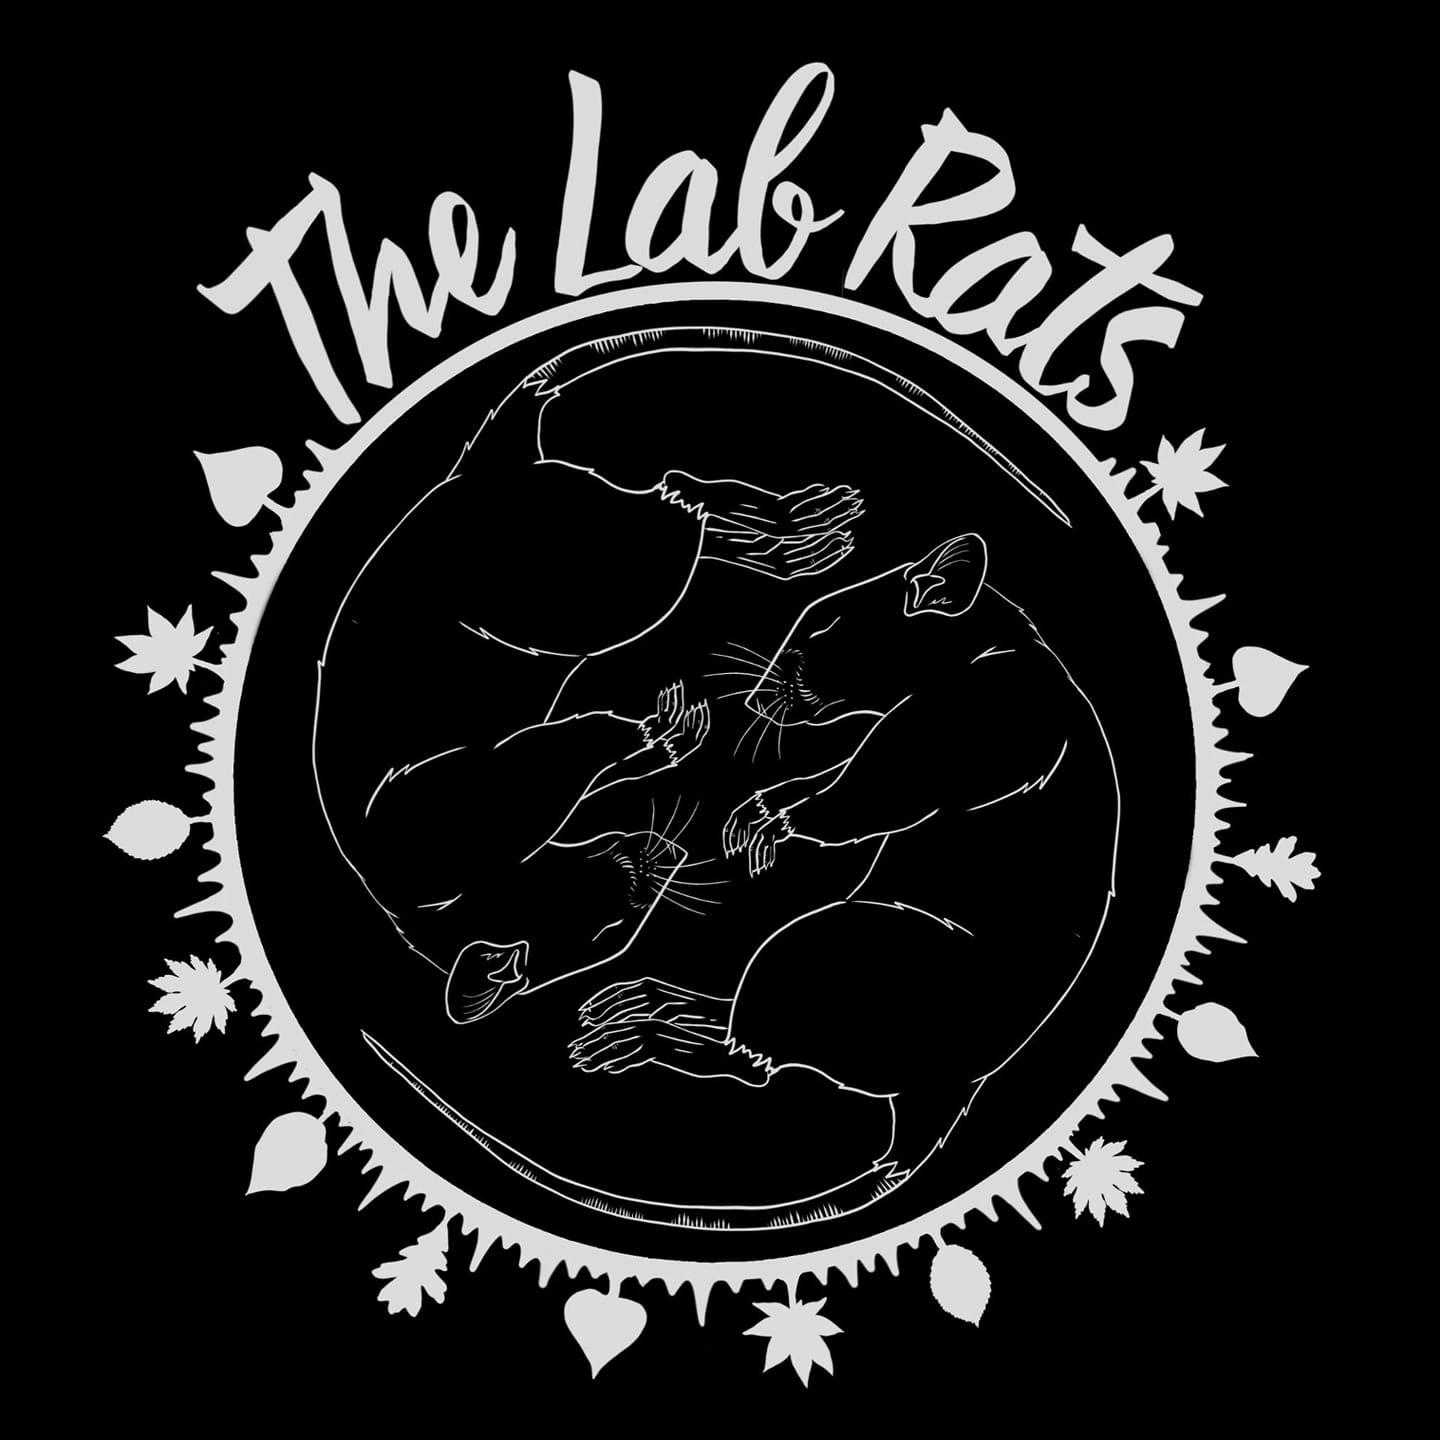 The Lab Rats